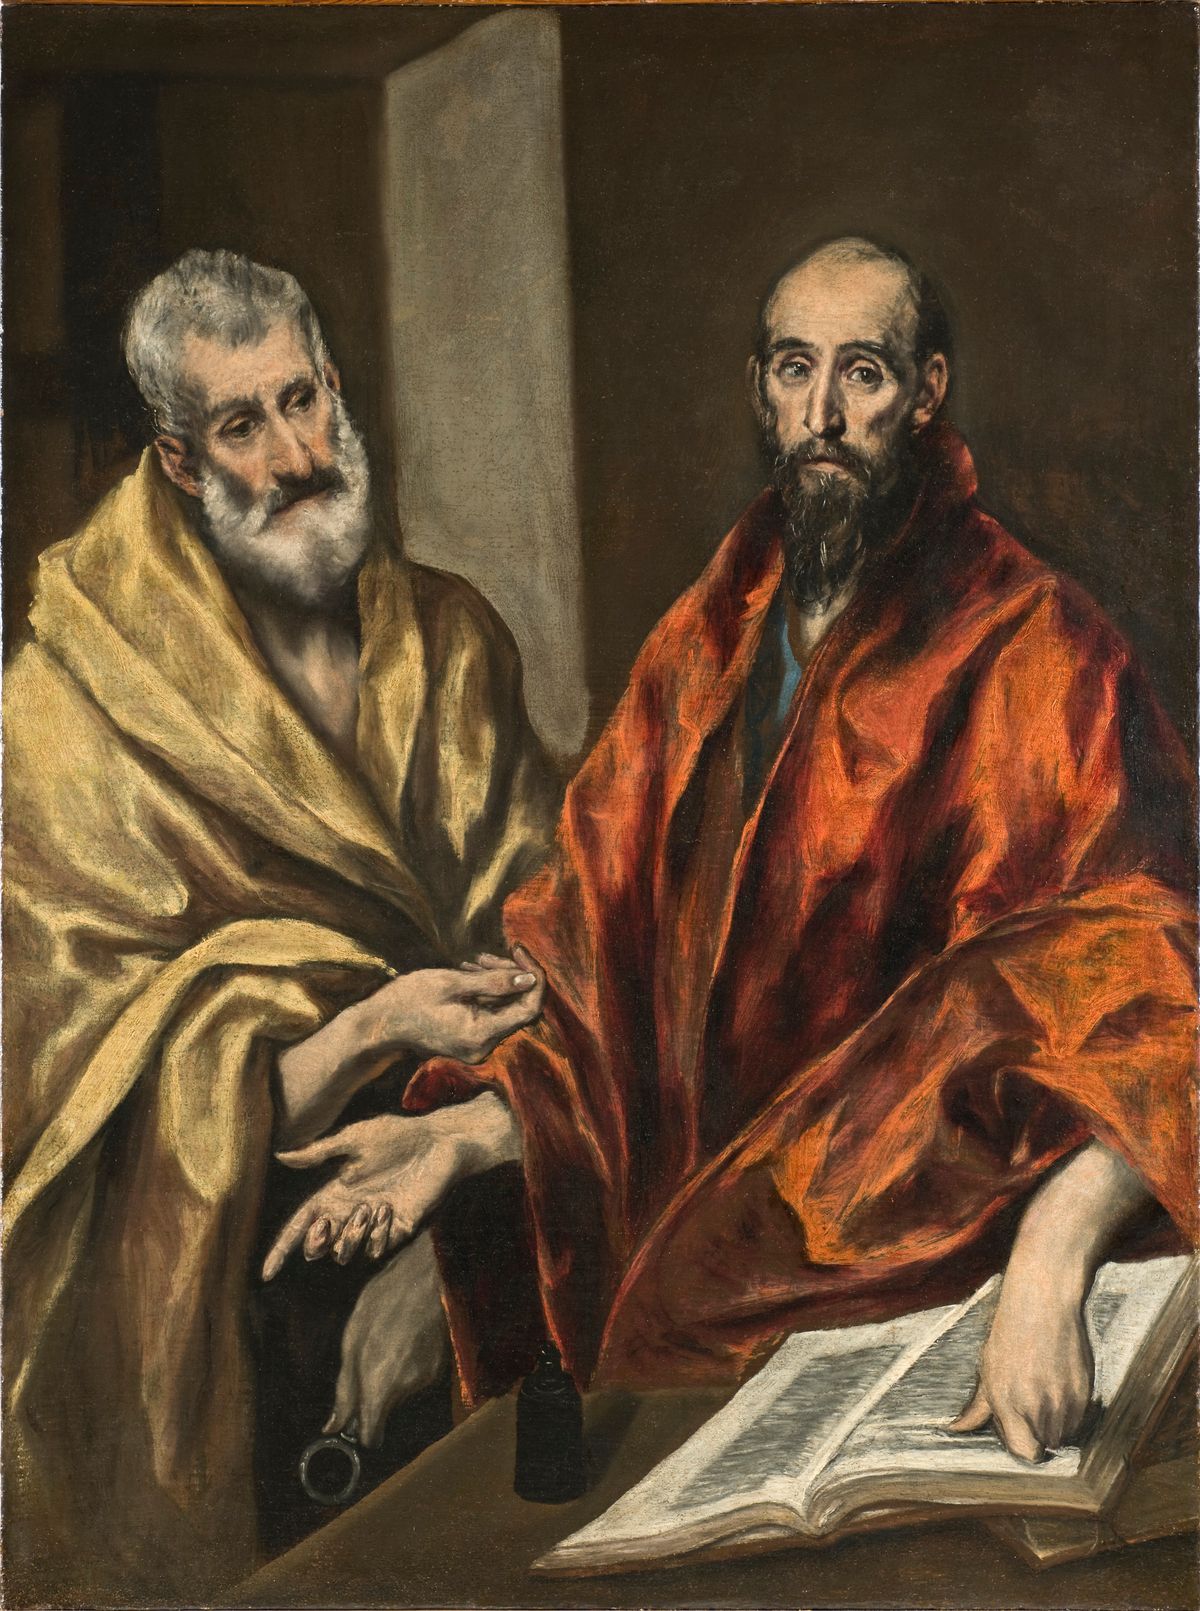 Saints Peter and Paul (1605-1608) by El Greco - Public Domain Catholic Painting